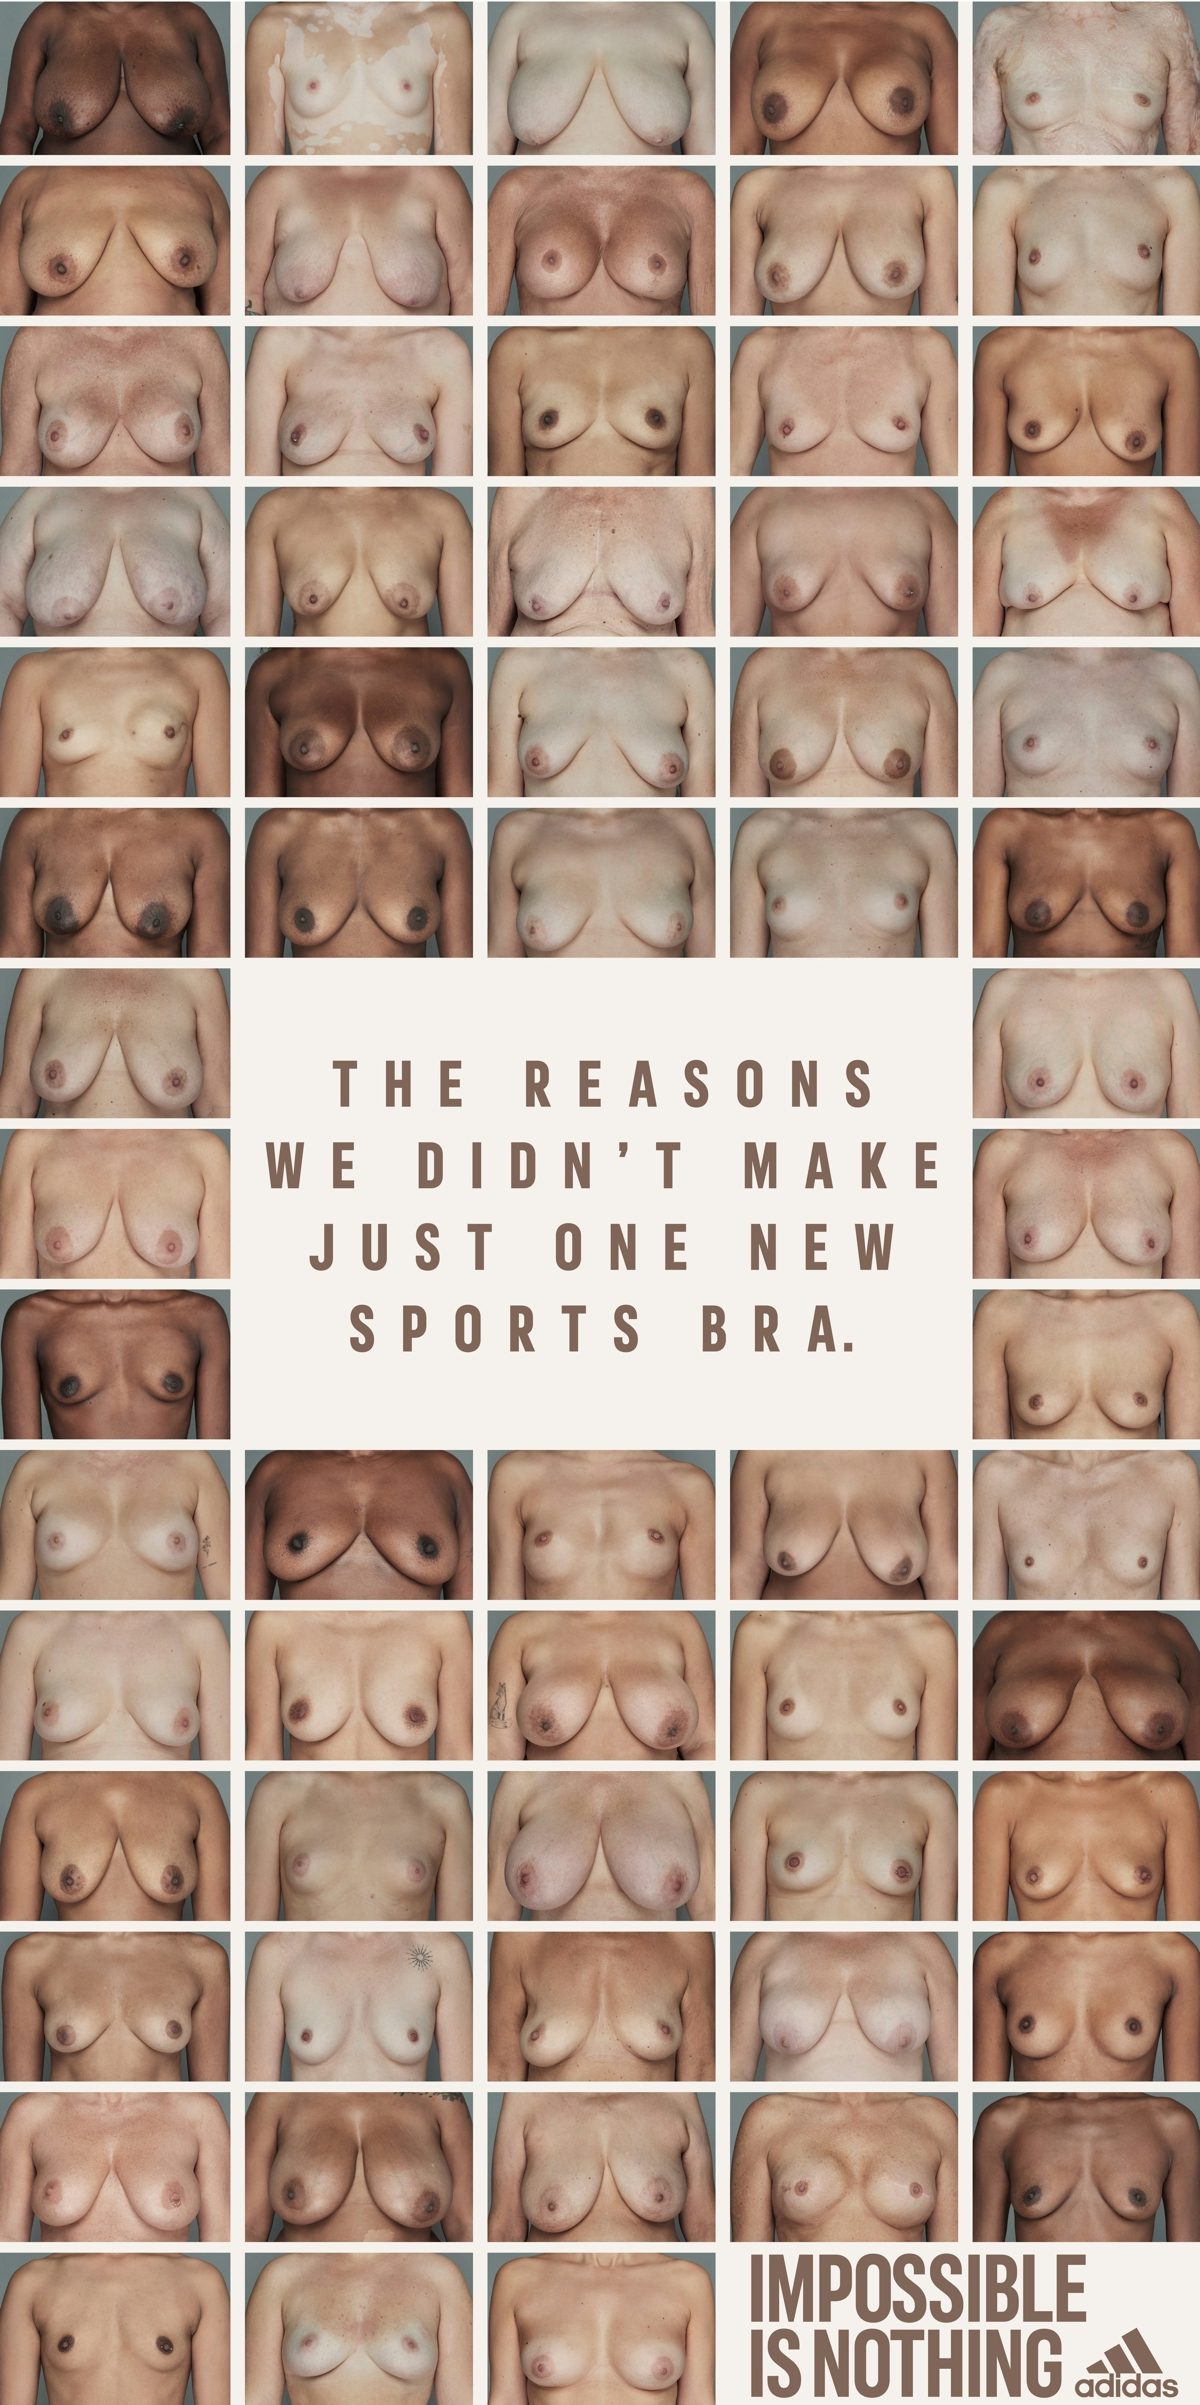 1200px x 2405px - Adidas created a gallery of naked breasts to launch its sports bra range